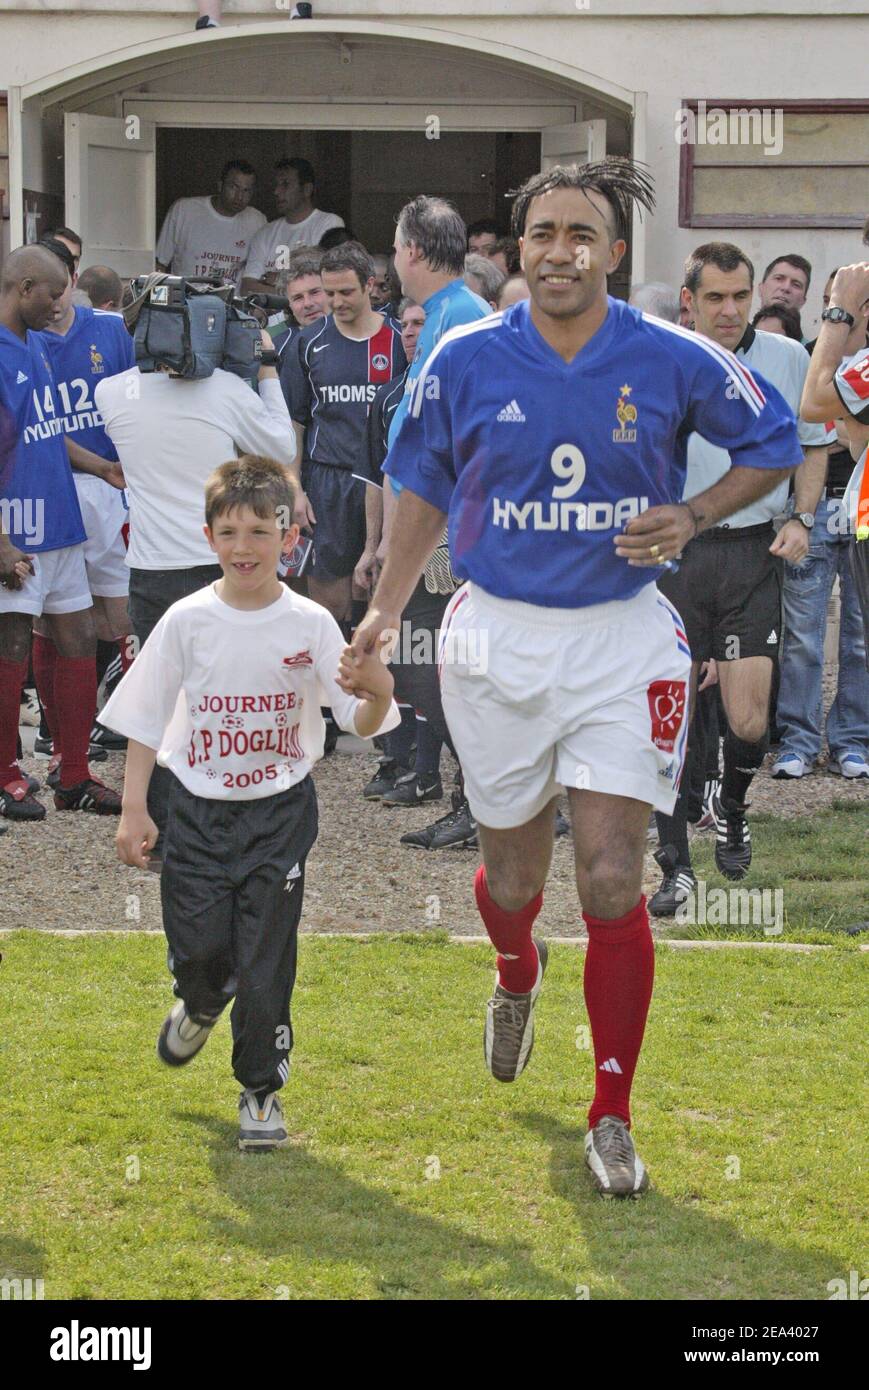 Former French International player Patrice Loko participates in a soccer match between former French International players and former PSG players in honor of the late PSG player Jean-Pierre Dogliani at the Louis Raffegeau stadium in Le Pecq, near Paris, France, on April 30, 2005. Photo by Mehdi Taamallah/ABACA. Stock Photo